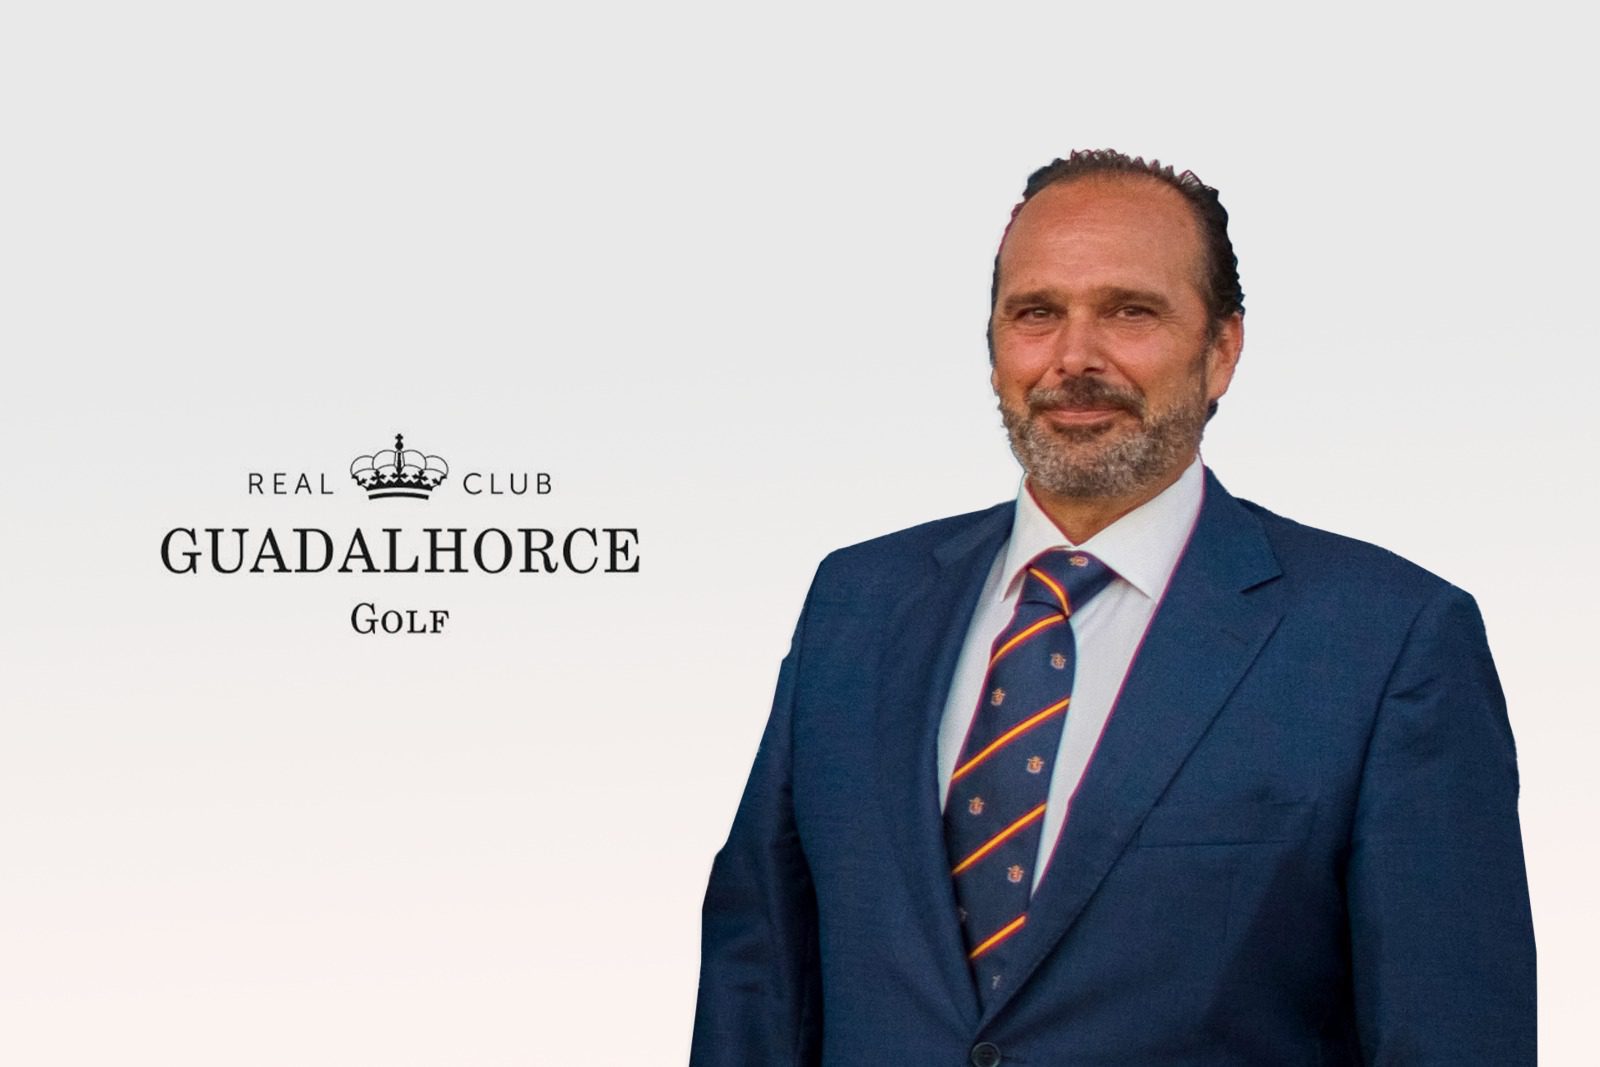 Ignacio Sánchez joins the Royal Guadalhorce Golf Club as General Manager